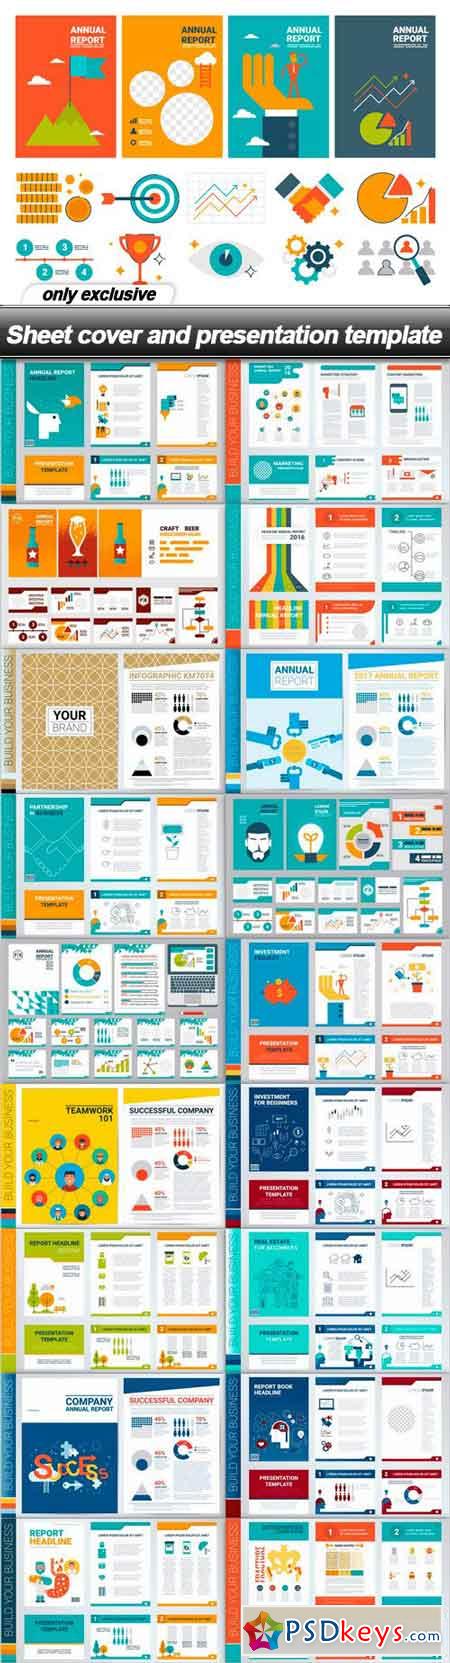 Sheet cover and presentation template - 19 EPS